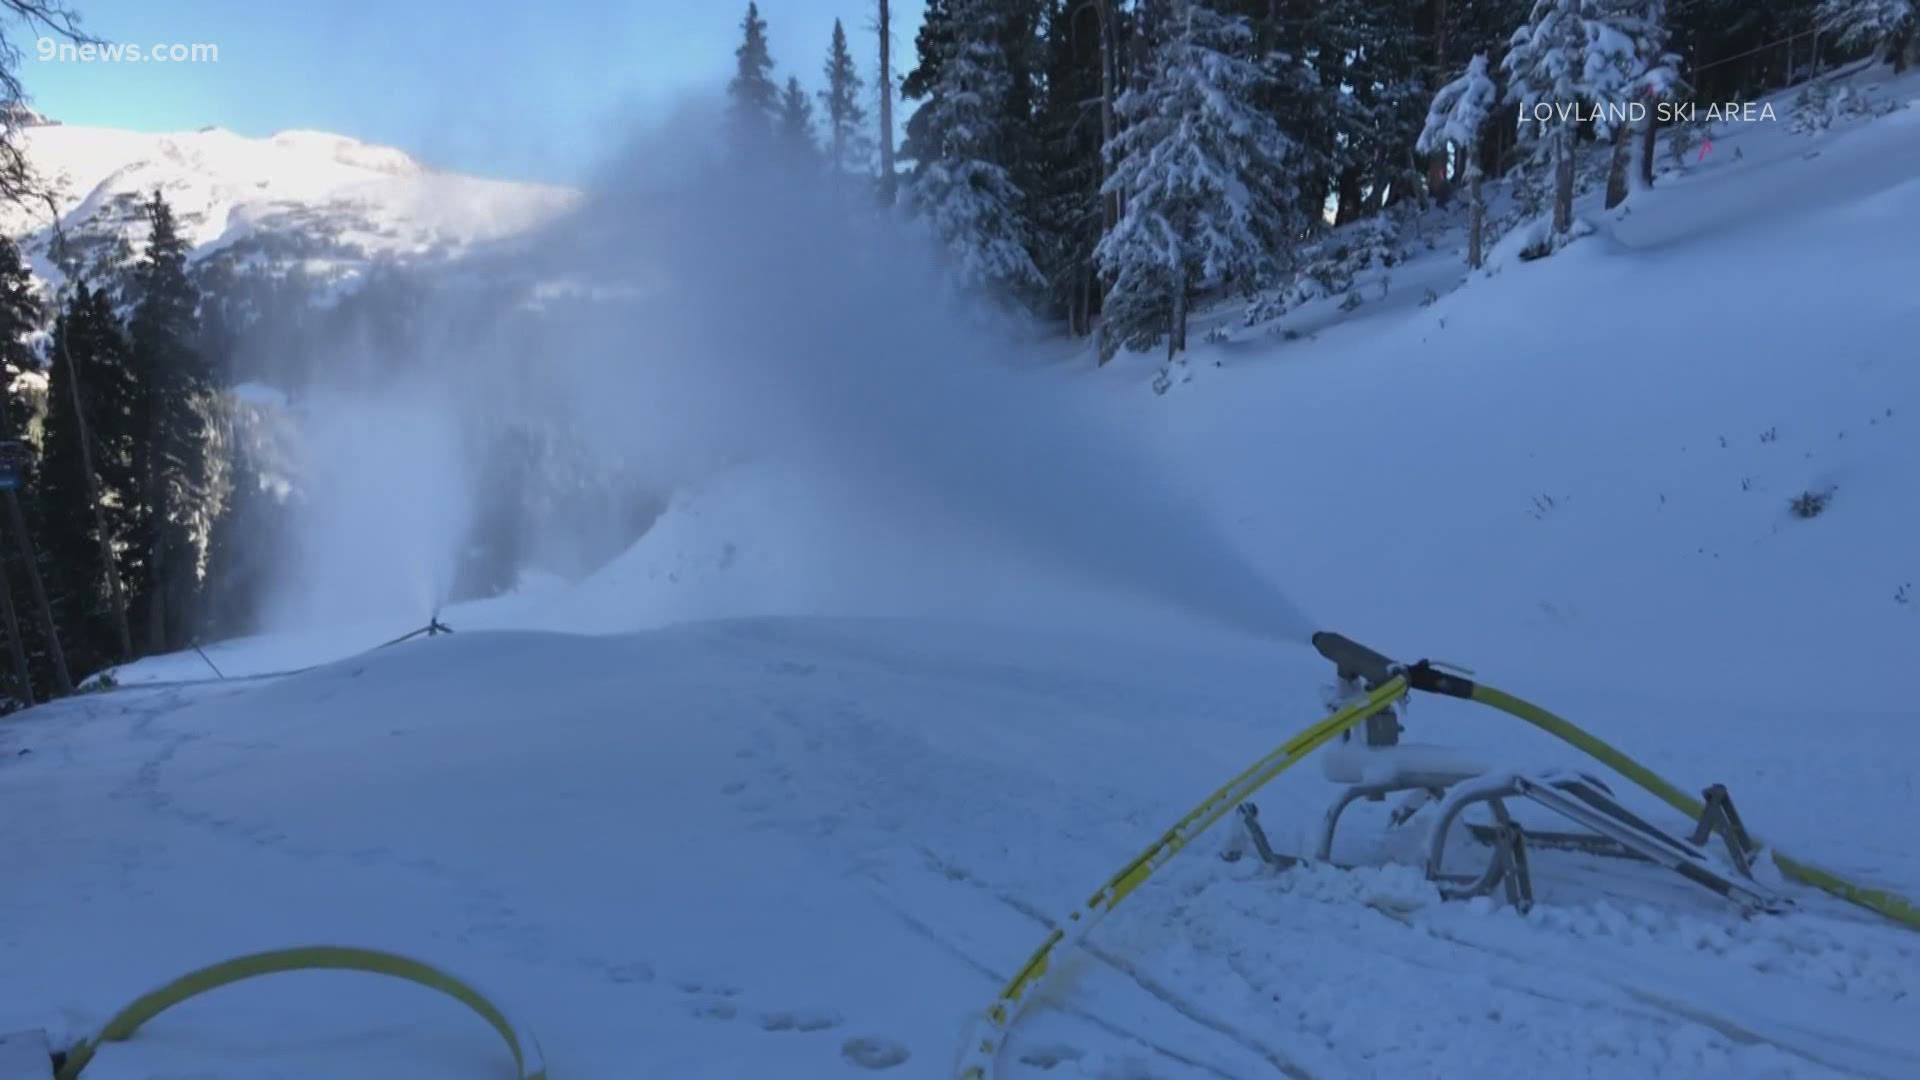 Cold temperatures and a blast of weekend snow have given Loveland Ski Area a kickstart in the snowmaking process.